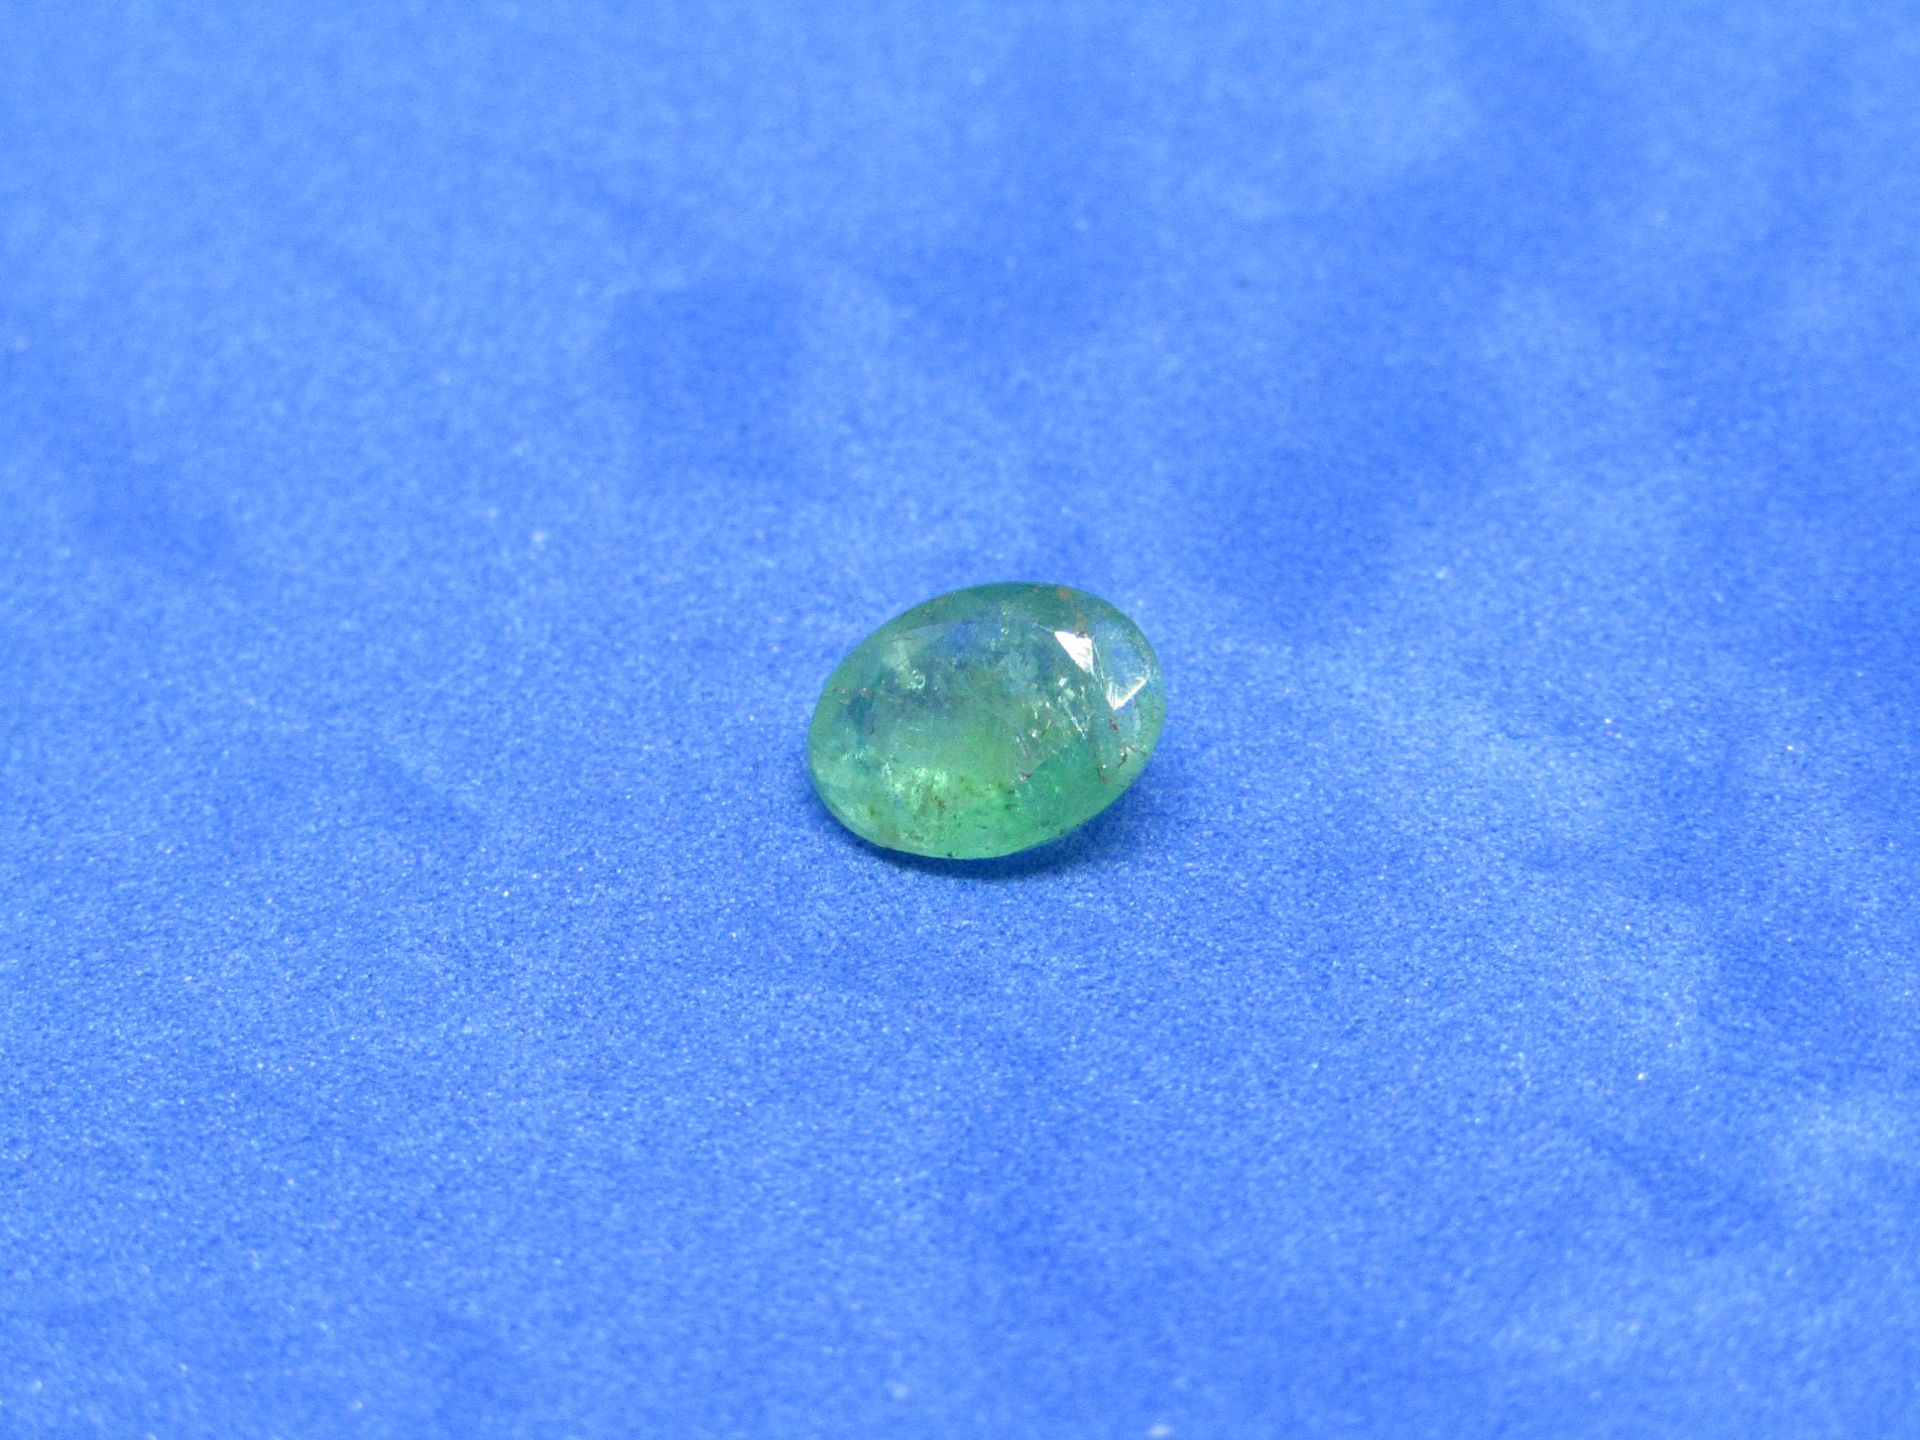 ** NO BUYERS COMMISSION ON THIS LOT ** Natural Colombian Emerald. 0.63 Carat - Oval cut. Average